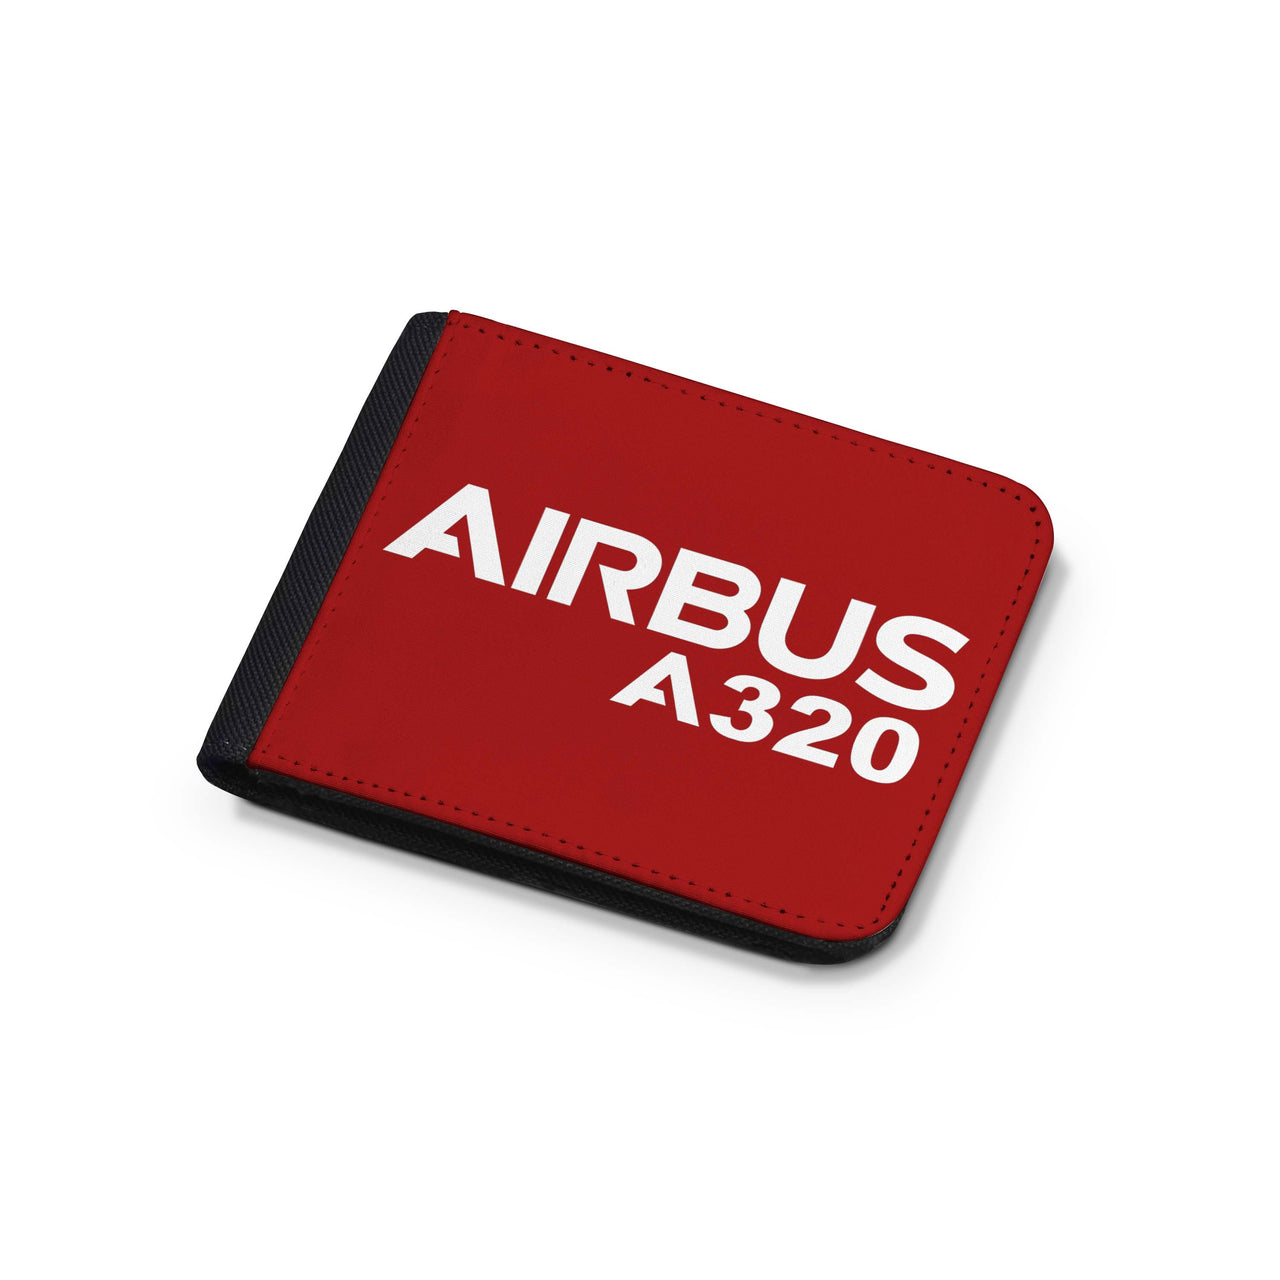 Airbus A320 & Text Designed Wallets